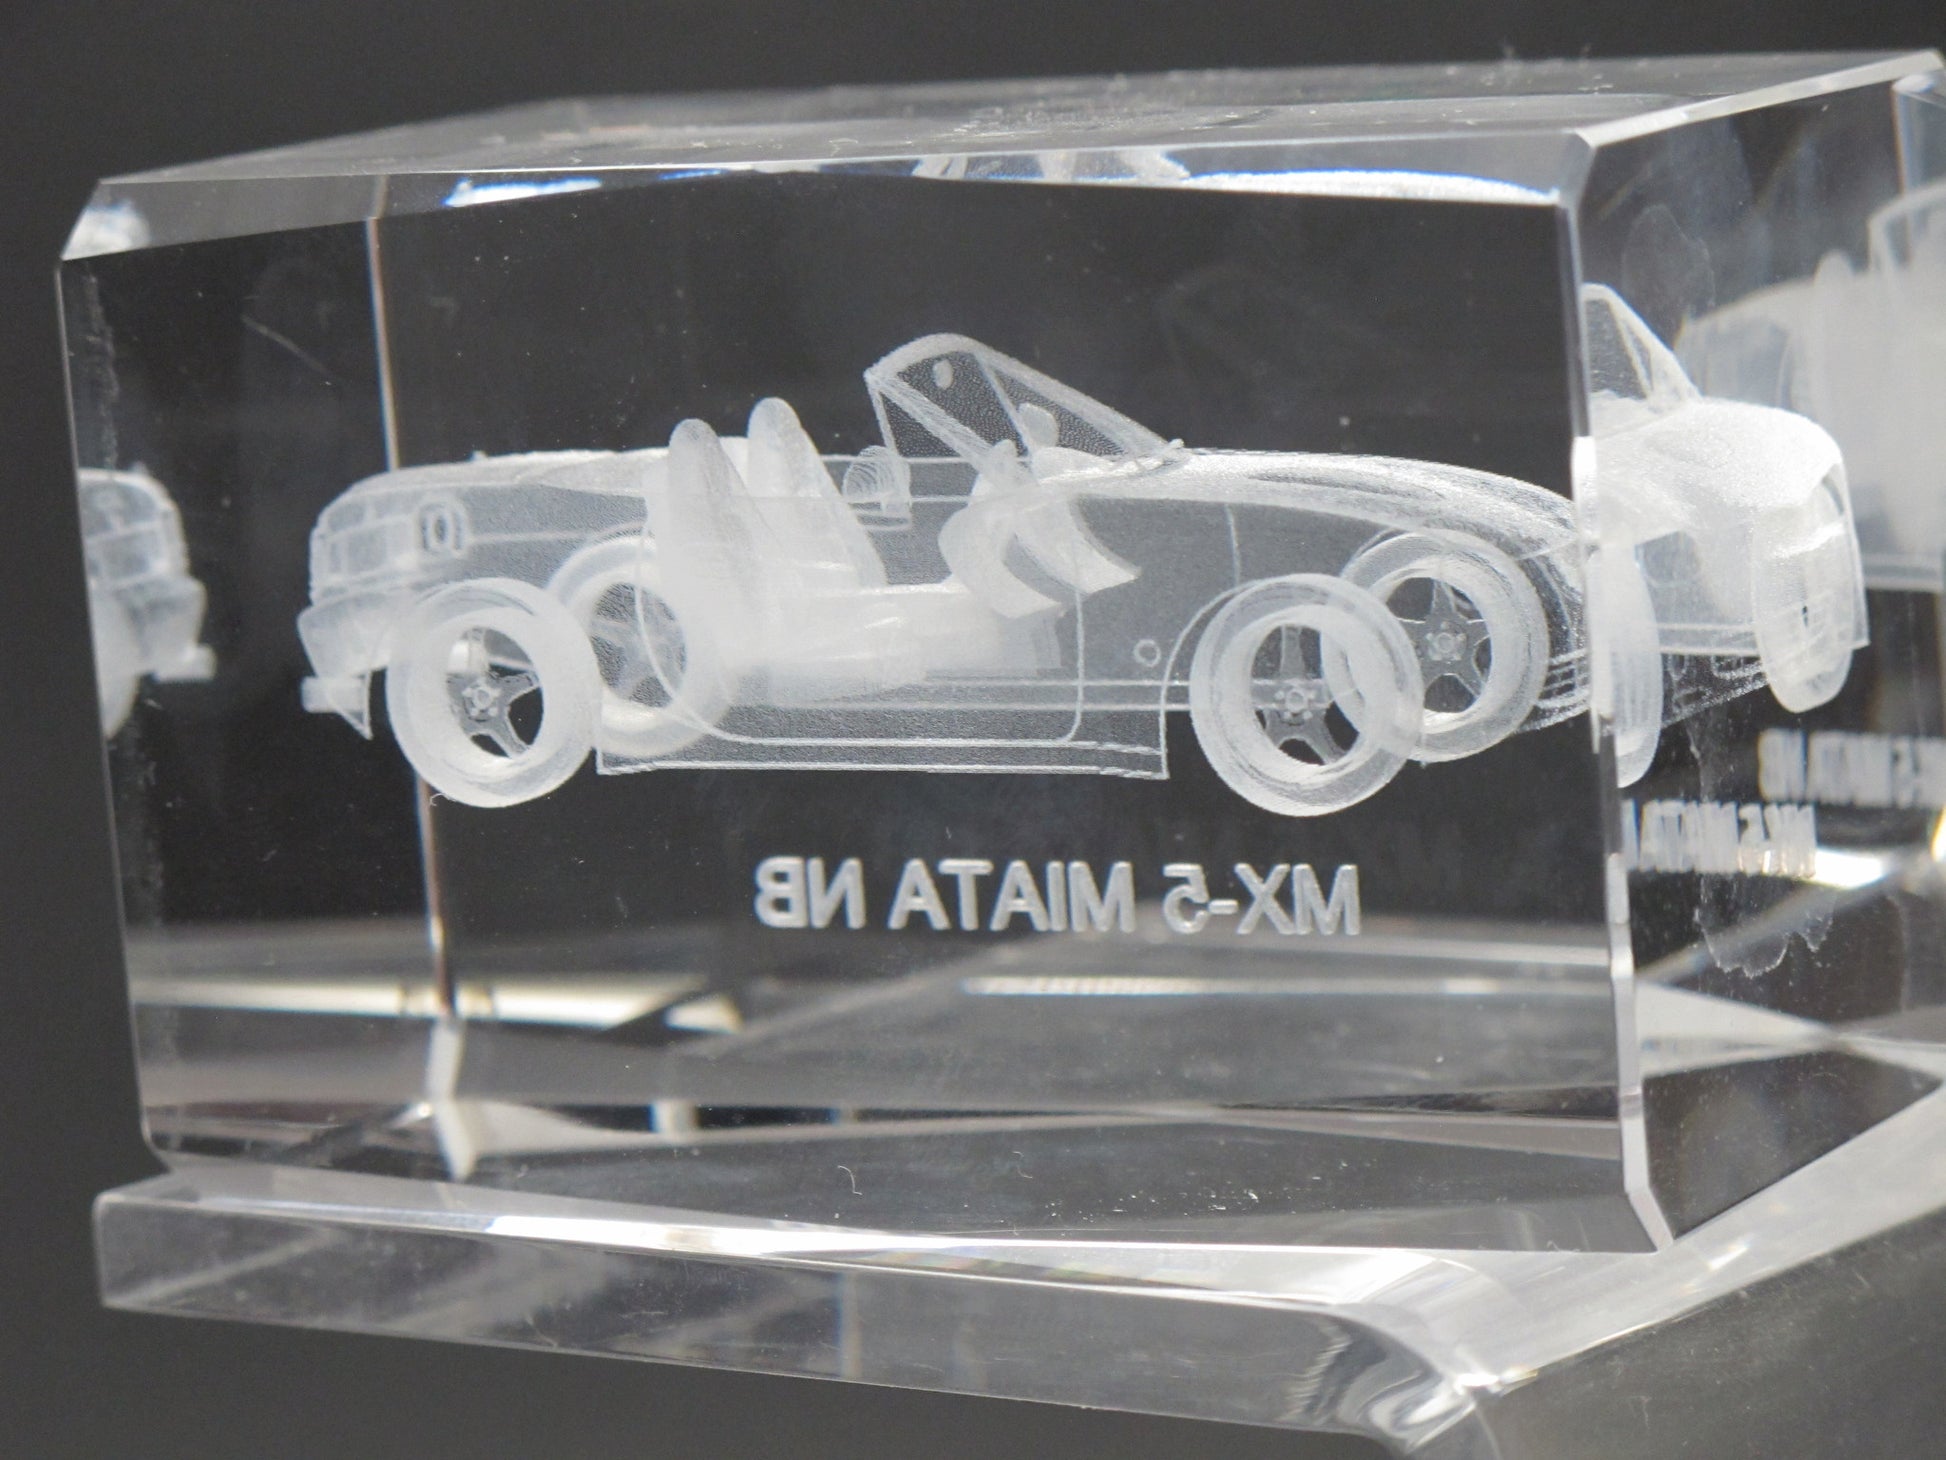 MX-5 MIATA NB glass paperweight, Great gift - O'Rourke crystal awards & gifts abp cut glass